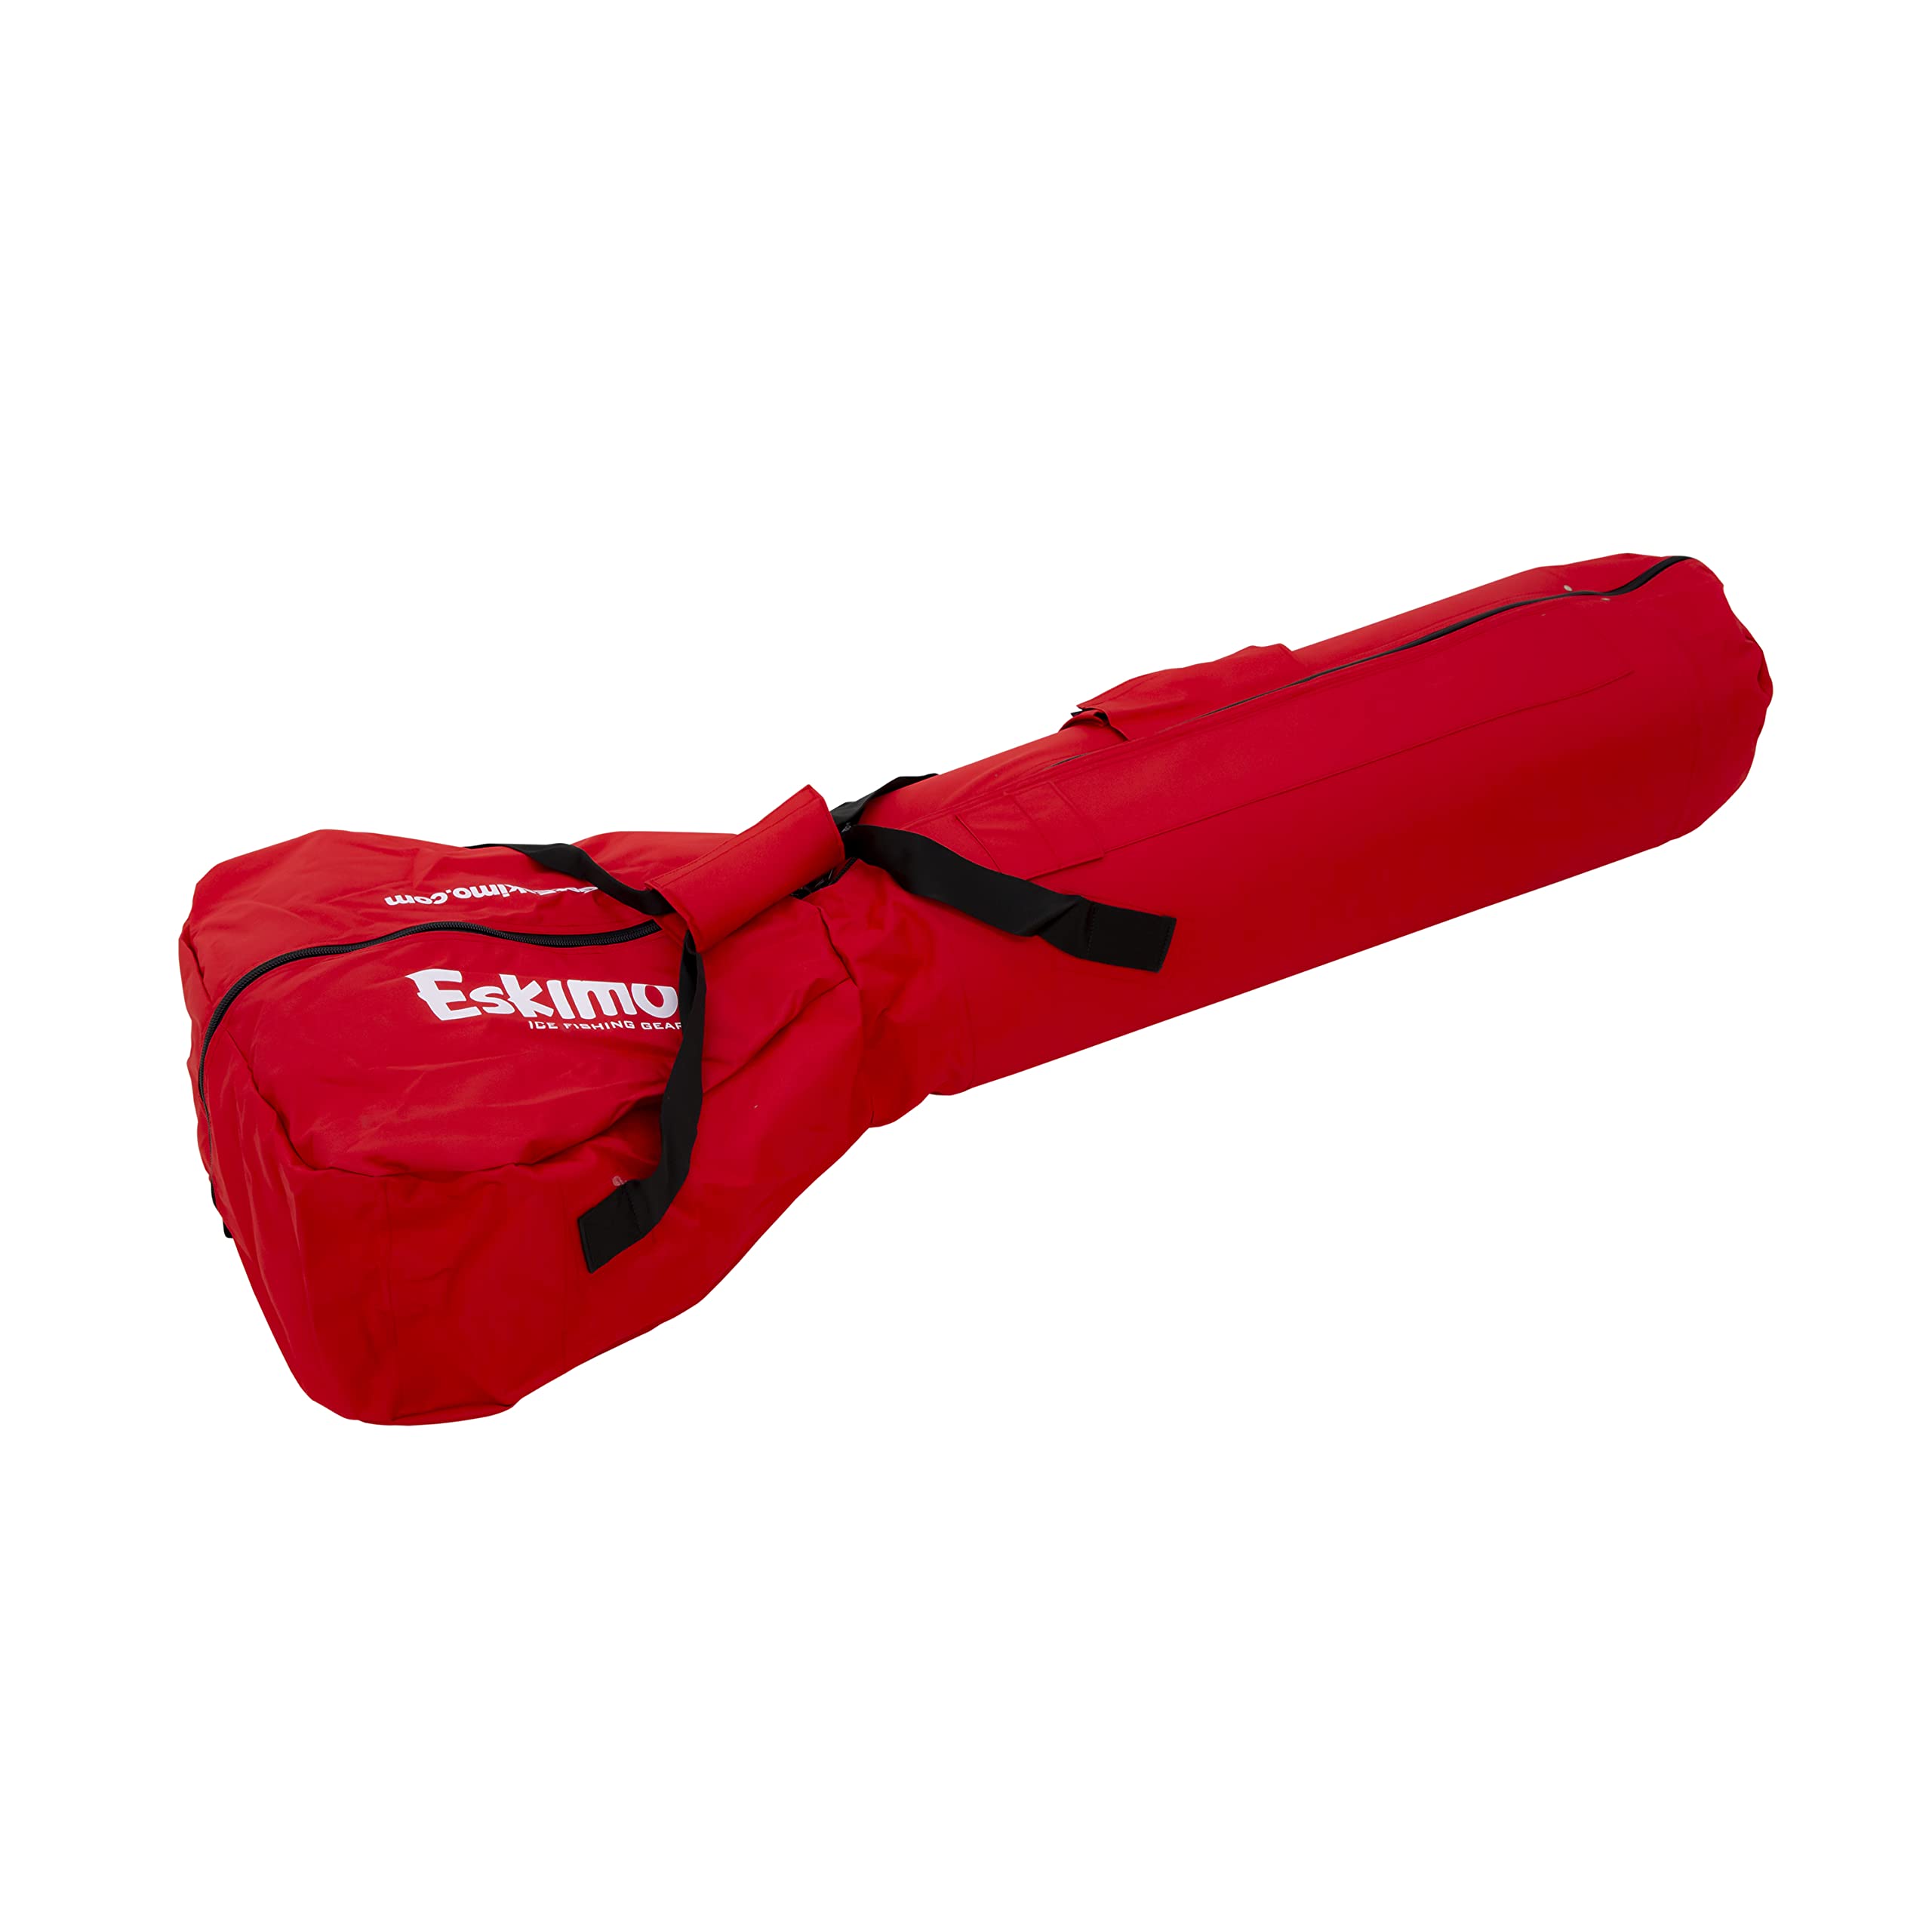 Eskimo 69812 Power Ice Auger Carrying Bag, Fits all Eskimo Augers, red,  standard